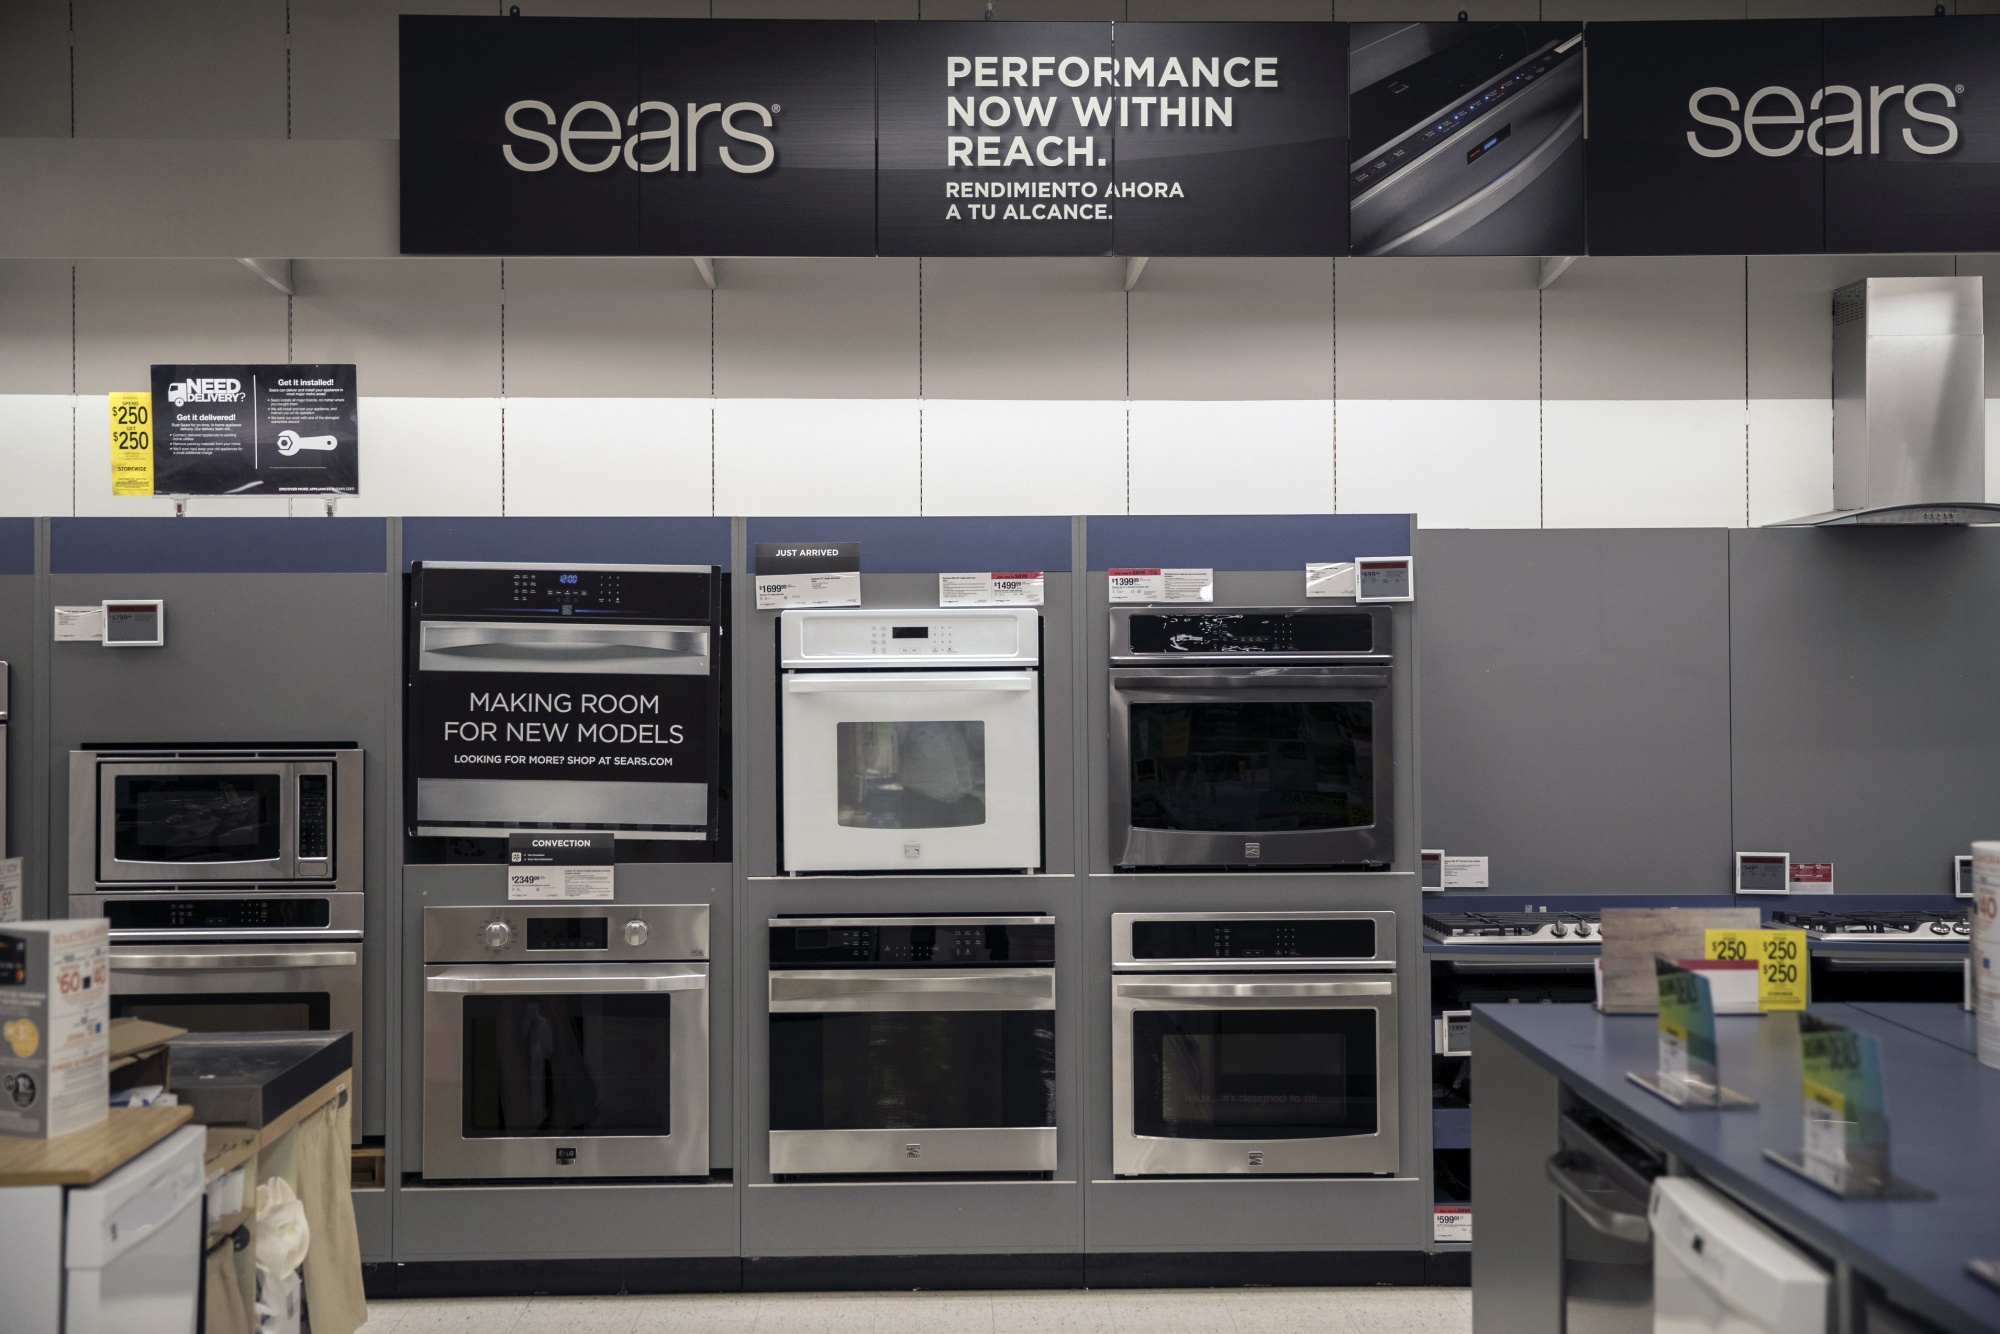 Sears Suppliers Trade Claims Amid